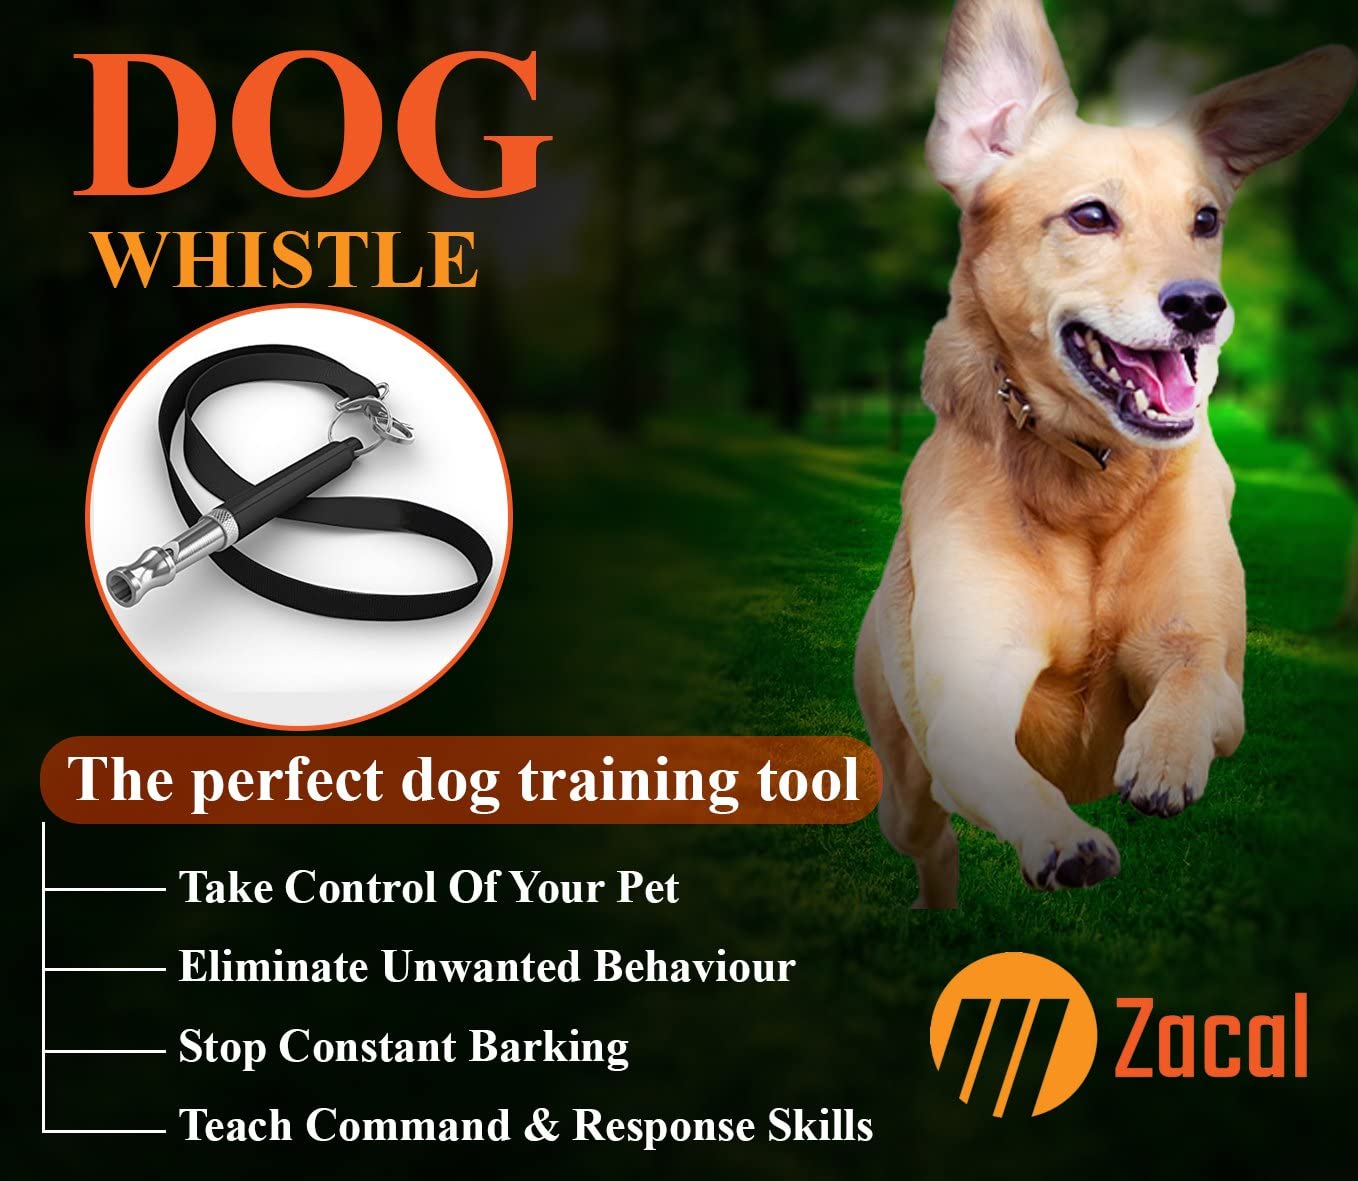 ZACAL Dog Whistle With Lanyard Neck Strap Train Your Dog